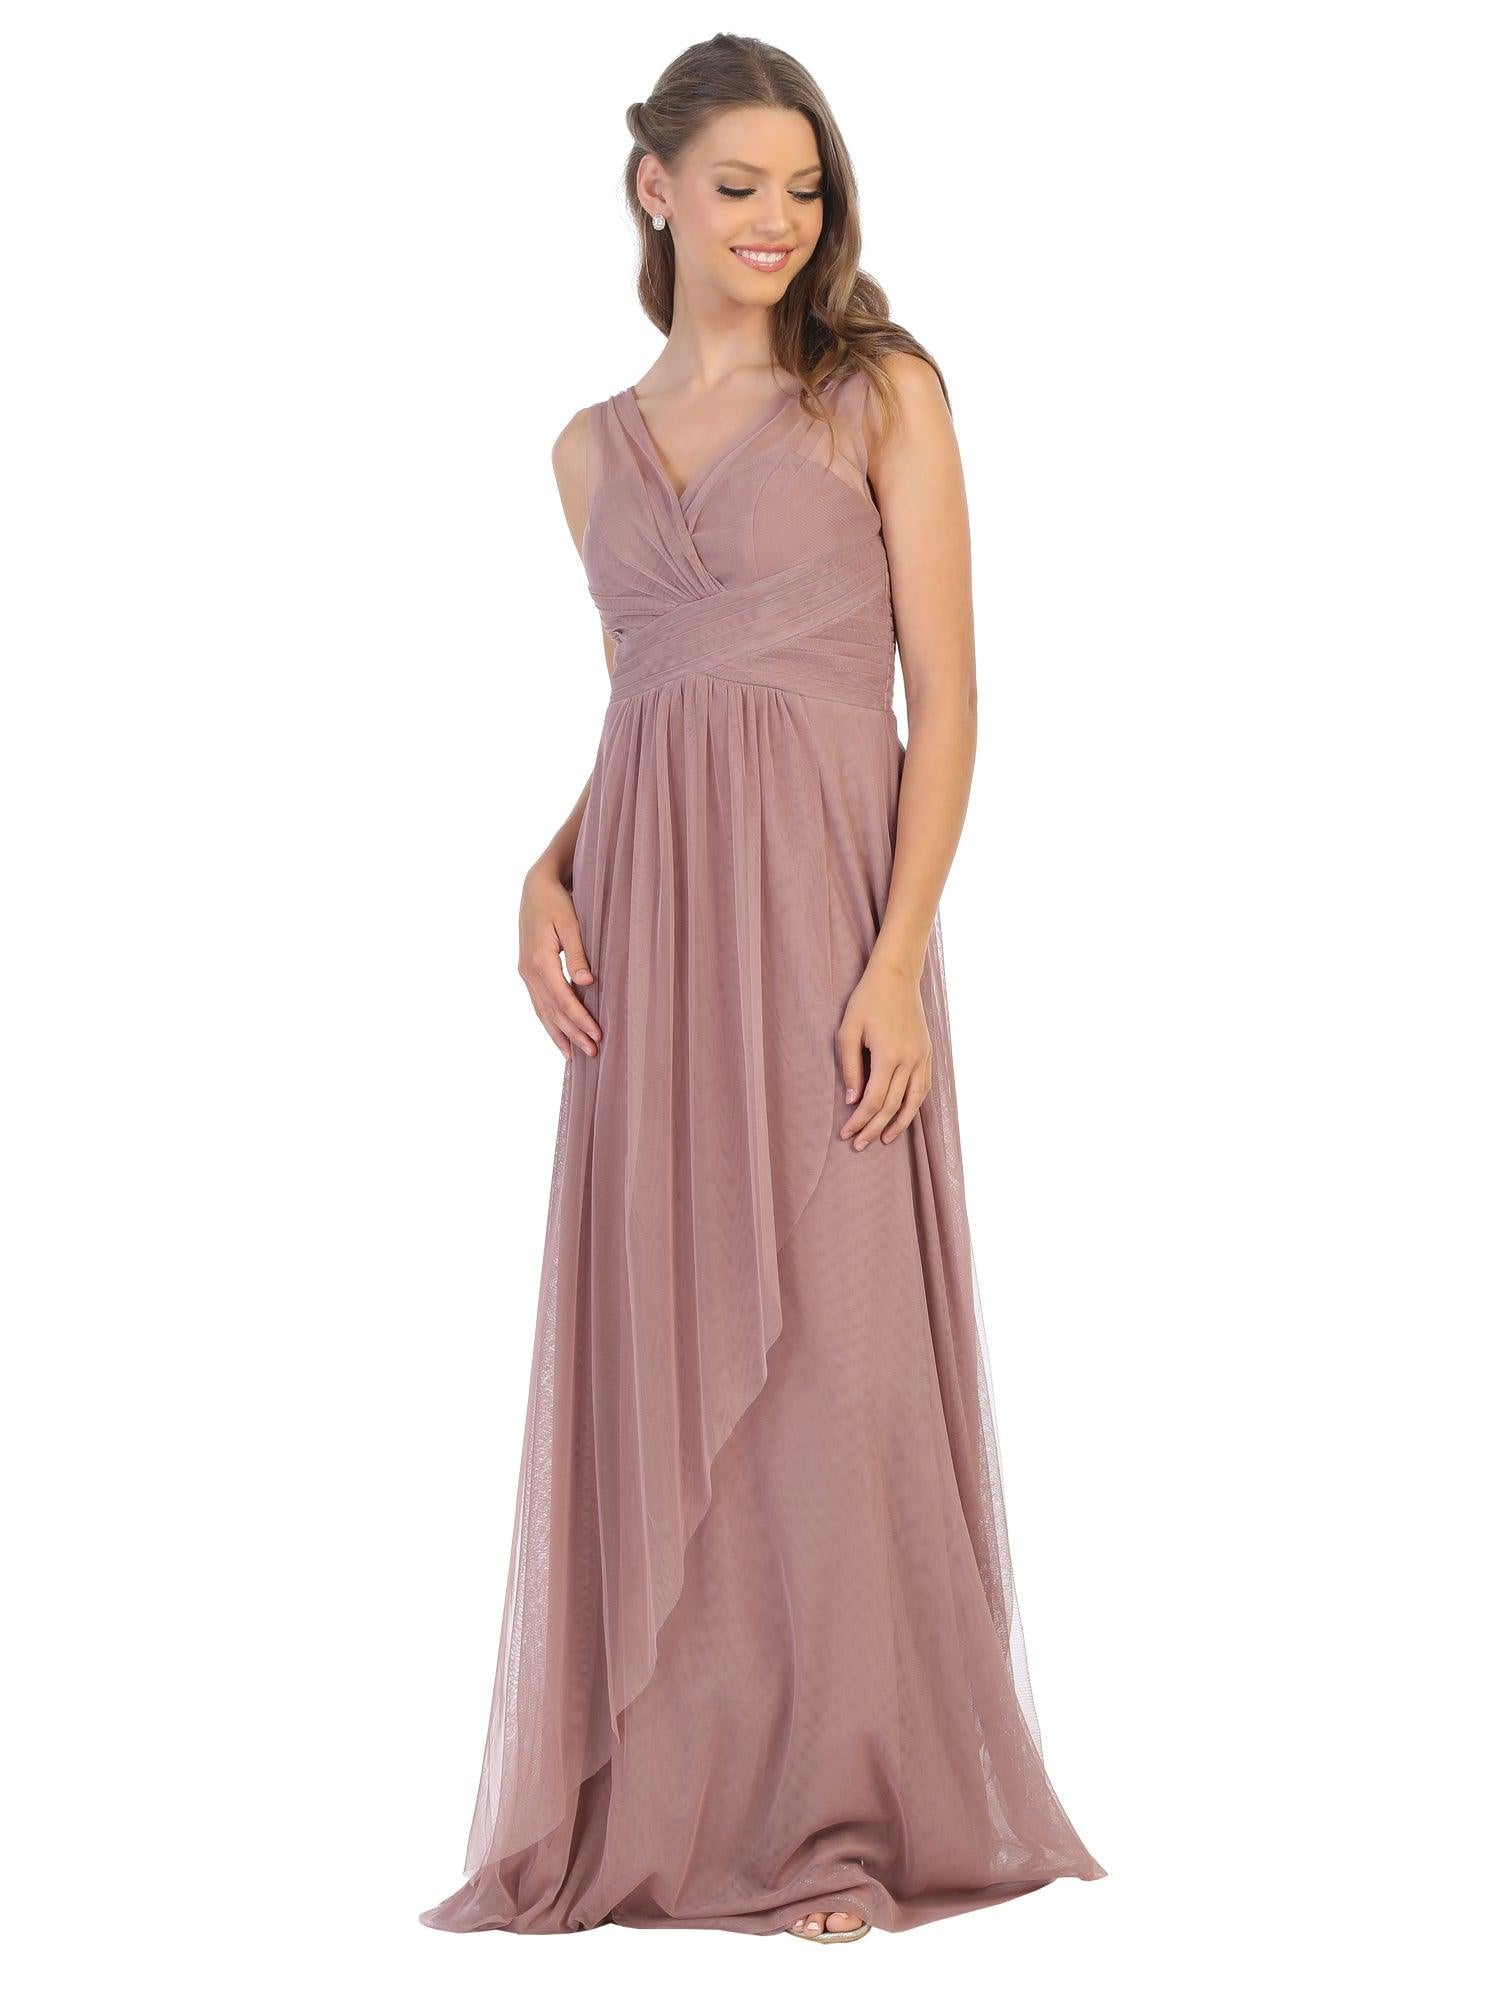 Long Formal Bridesmaids Sleeveless Tulle Dress - The Dress Outlet